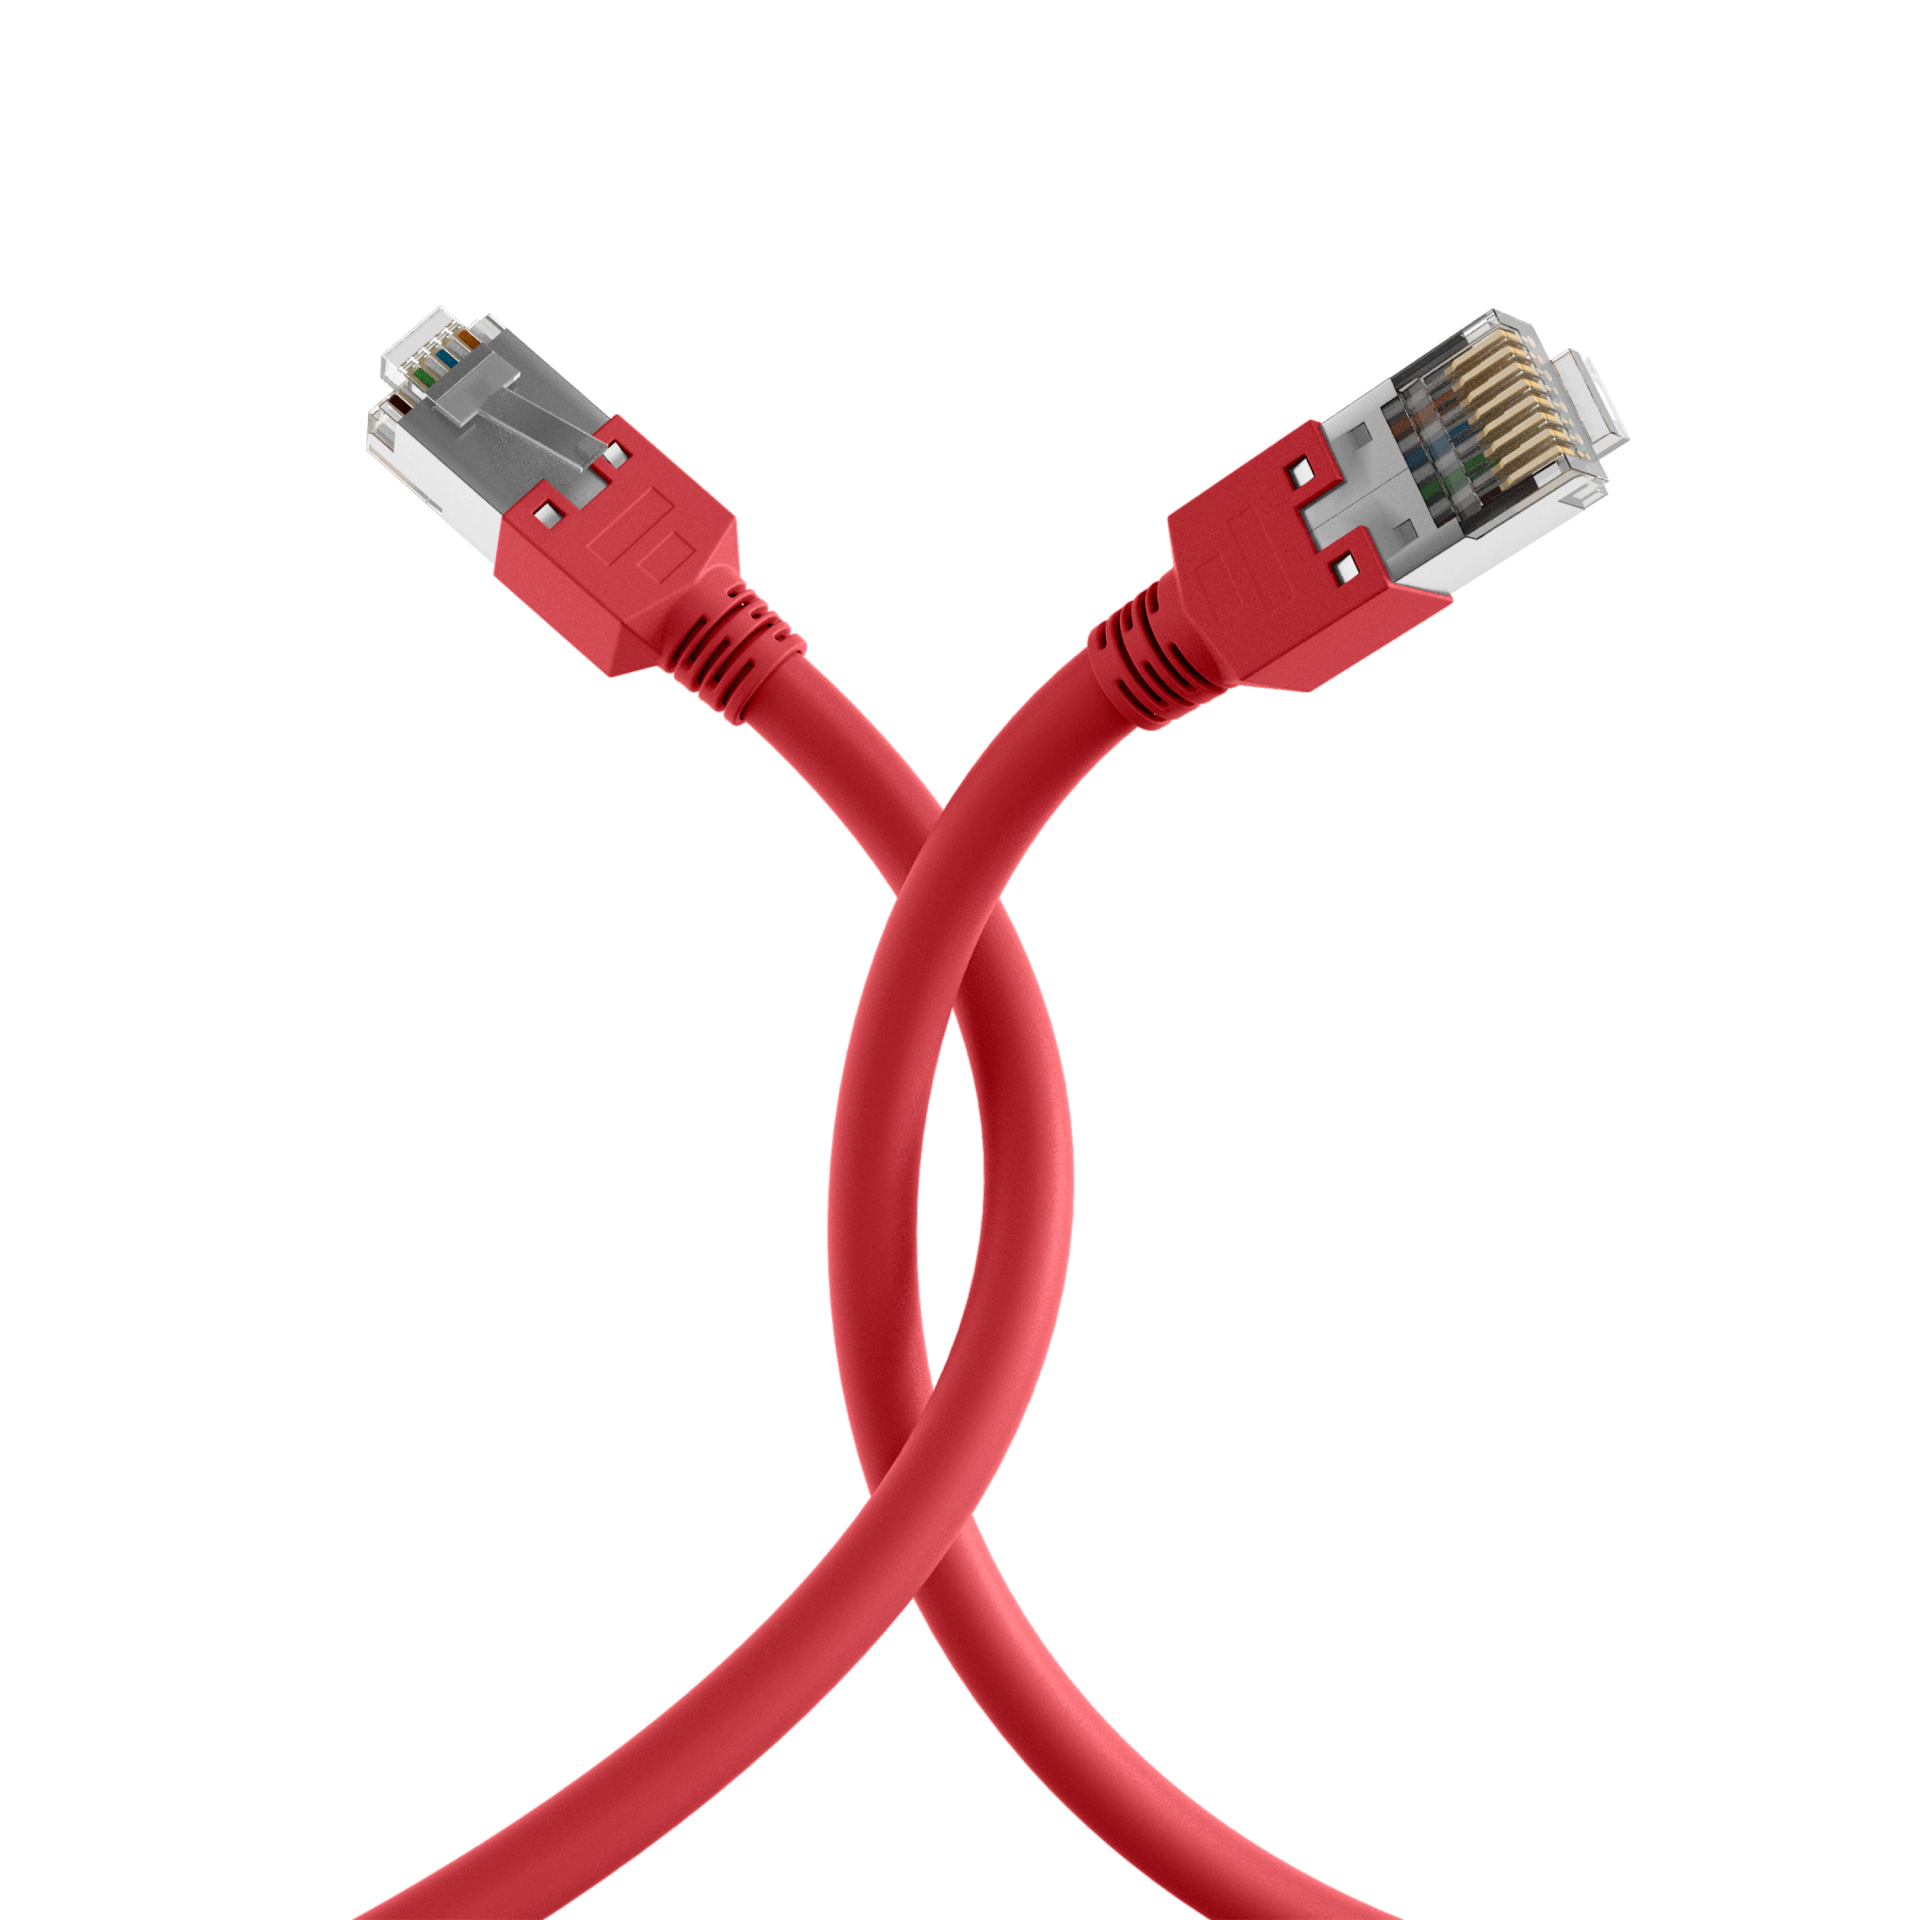 RJ45 Patch Cord Cat.5e S/UTP PVCDätwyler 5502 TM11 red 1,5m